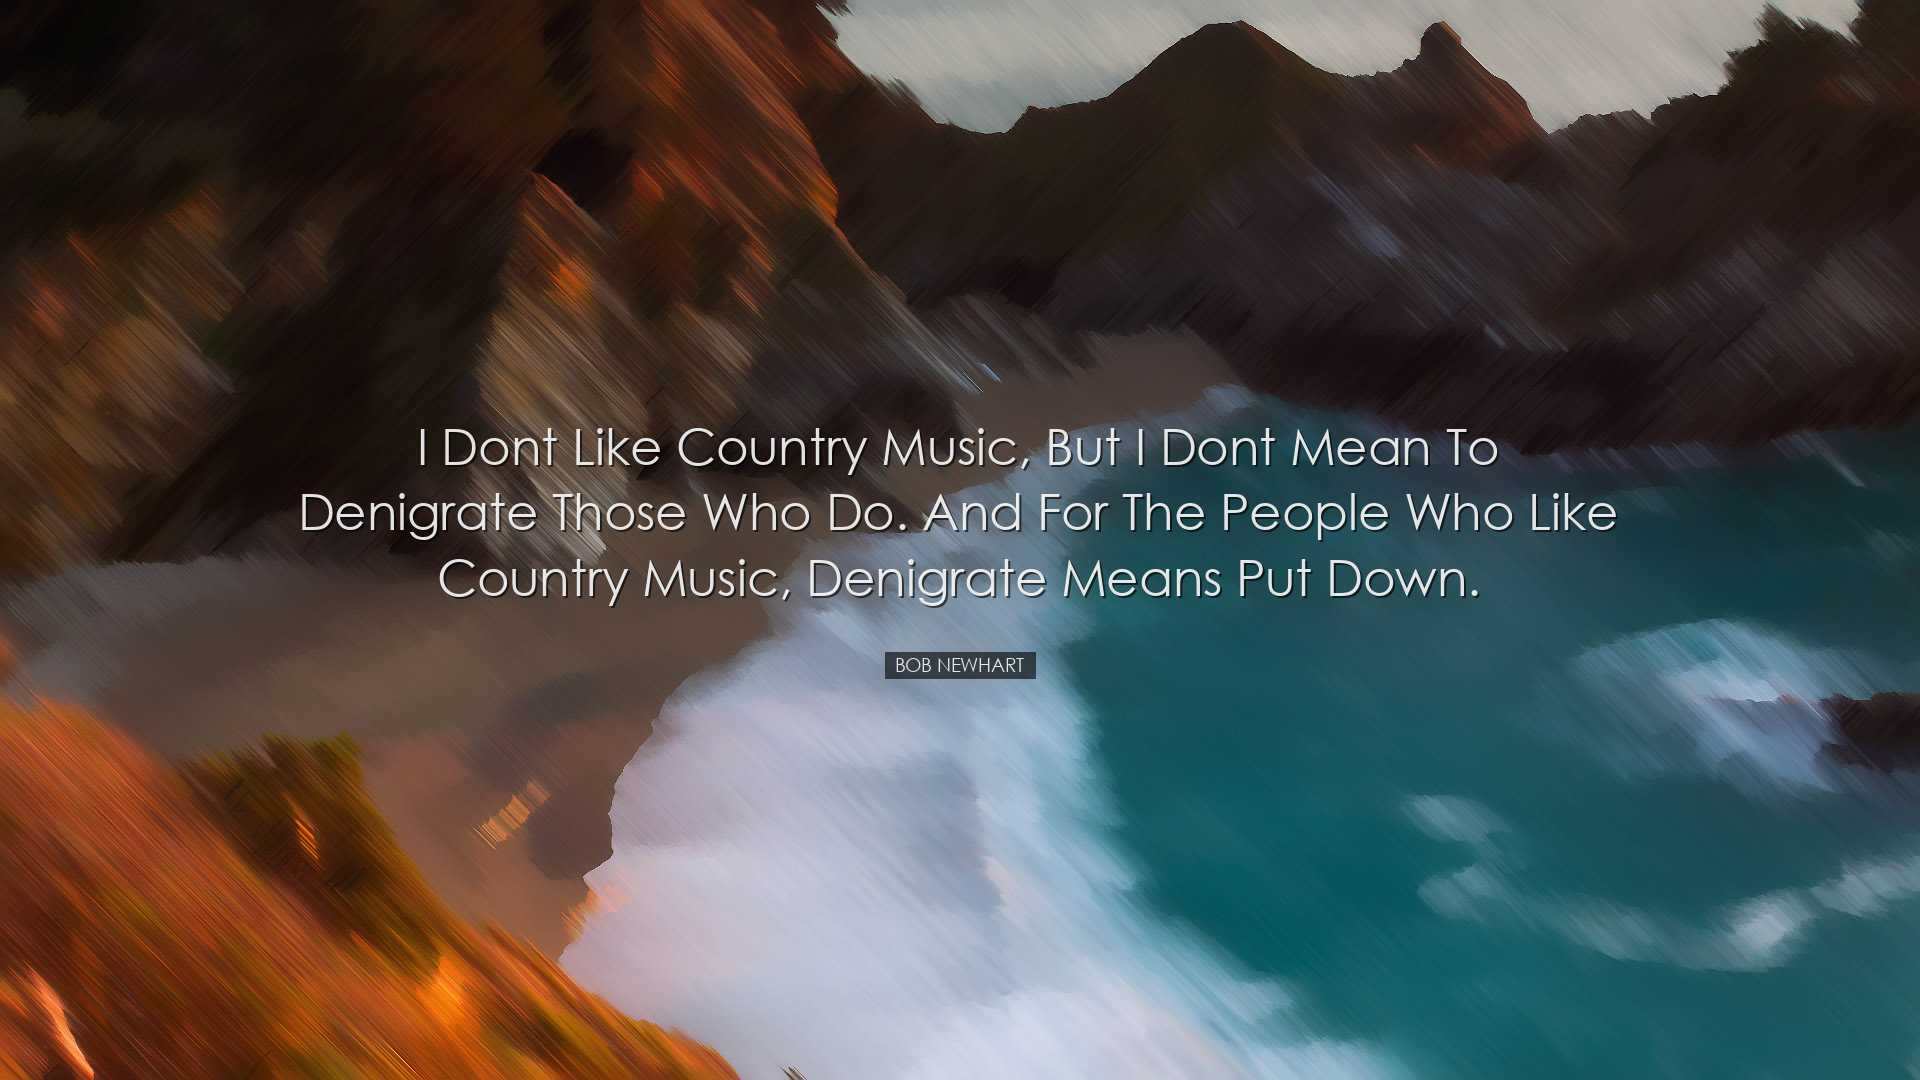 I dont like country music, but I dont mean to denigrate those who